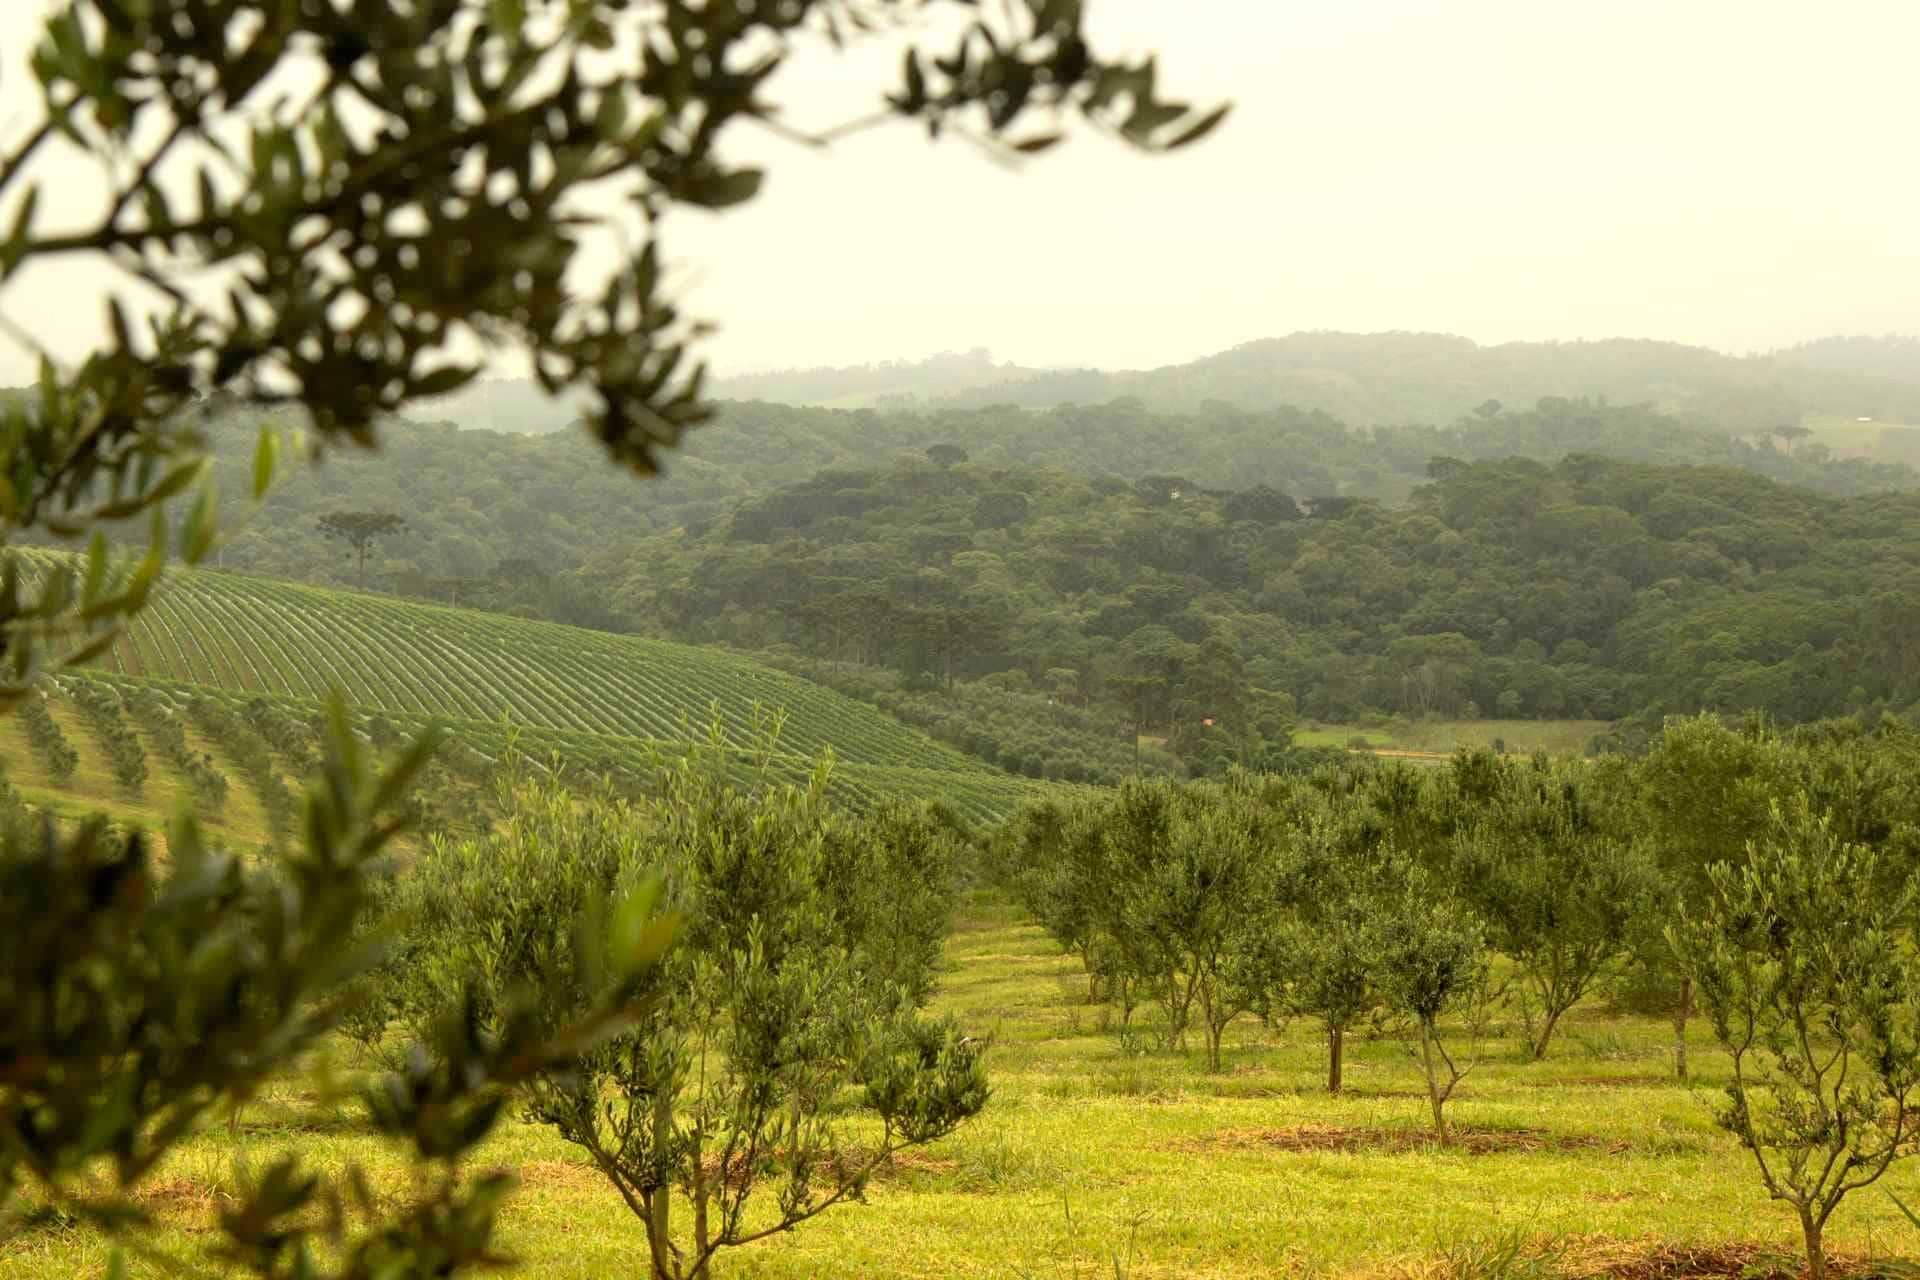 south-america-profiles-the-best-olive-oils-competitions-renewed-focus-on-quality-pays-off-for-brazilian-producers-at-2021-nyiooc-olive-oil-times